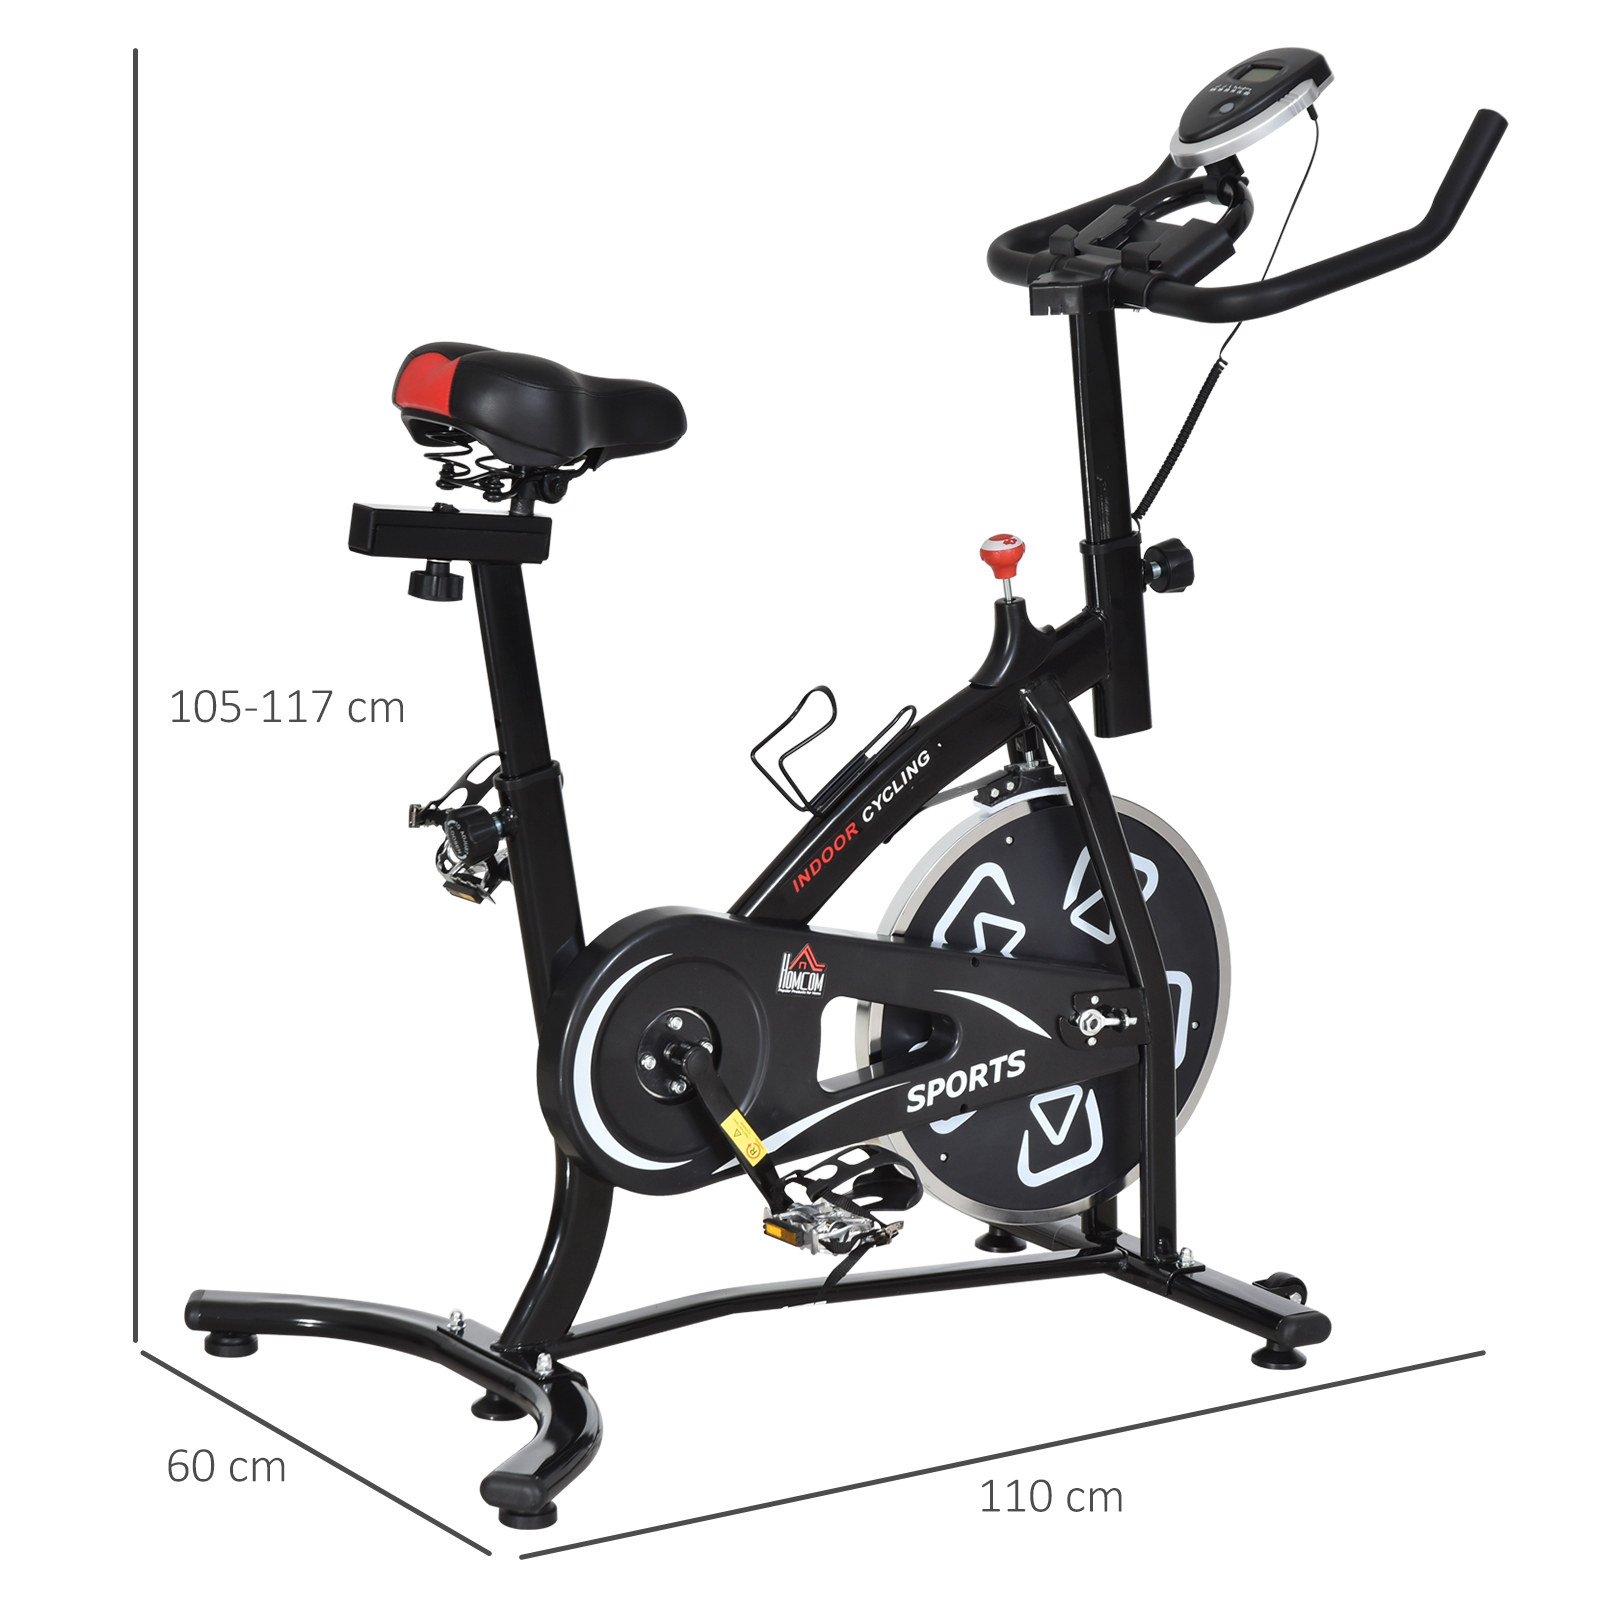 HOMCOM Exercise Training Bike Indoor Cycling Bicycle Trainer with LCD